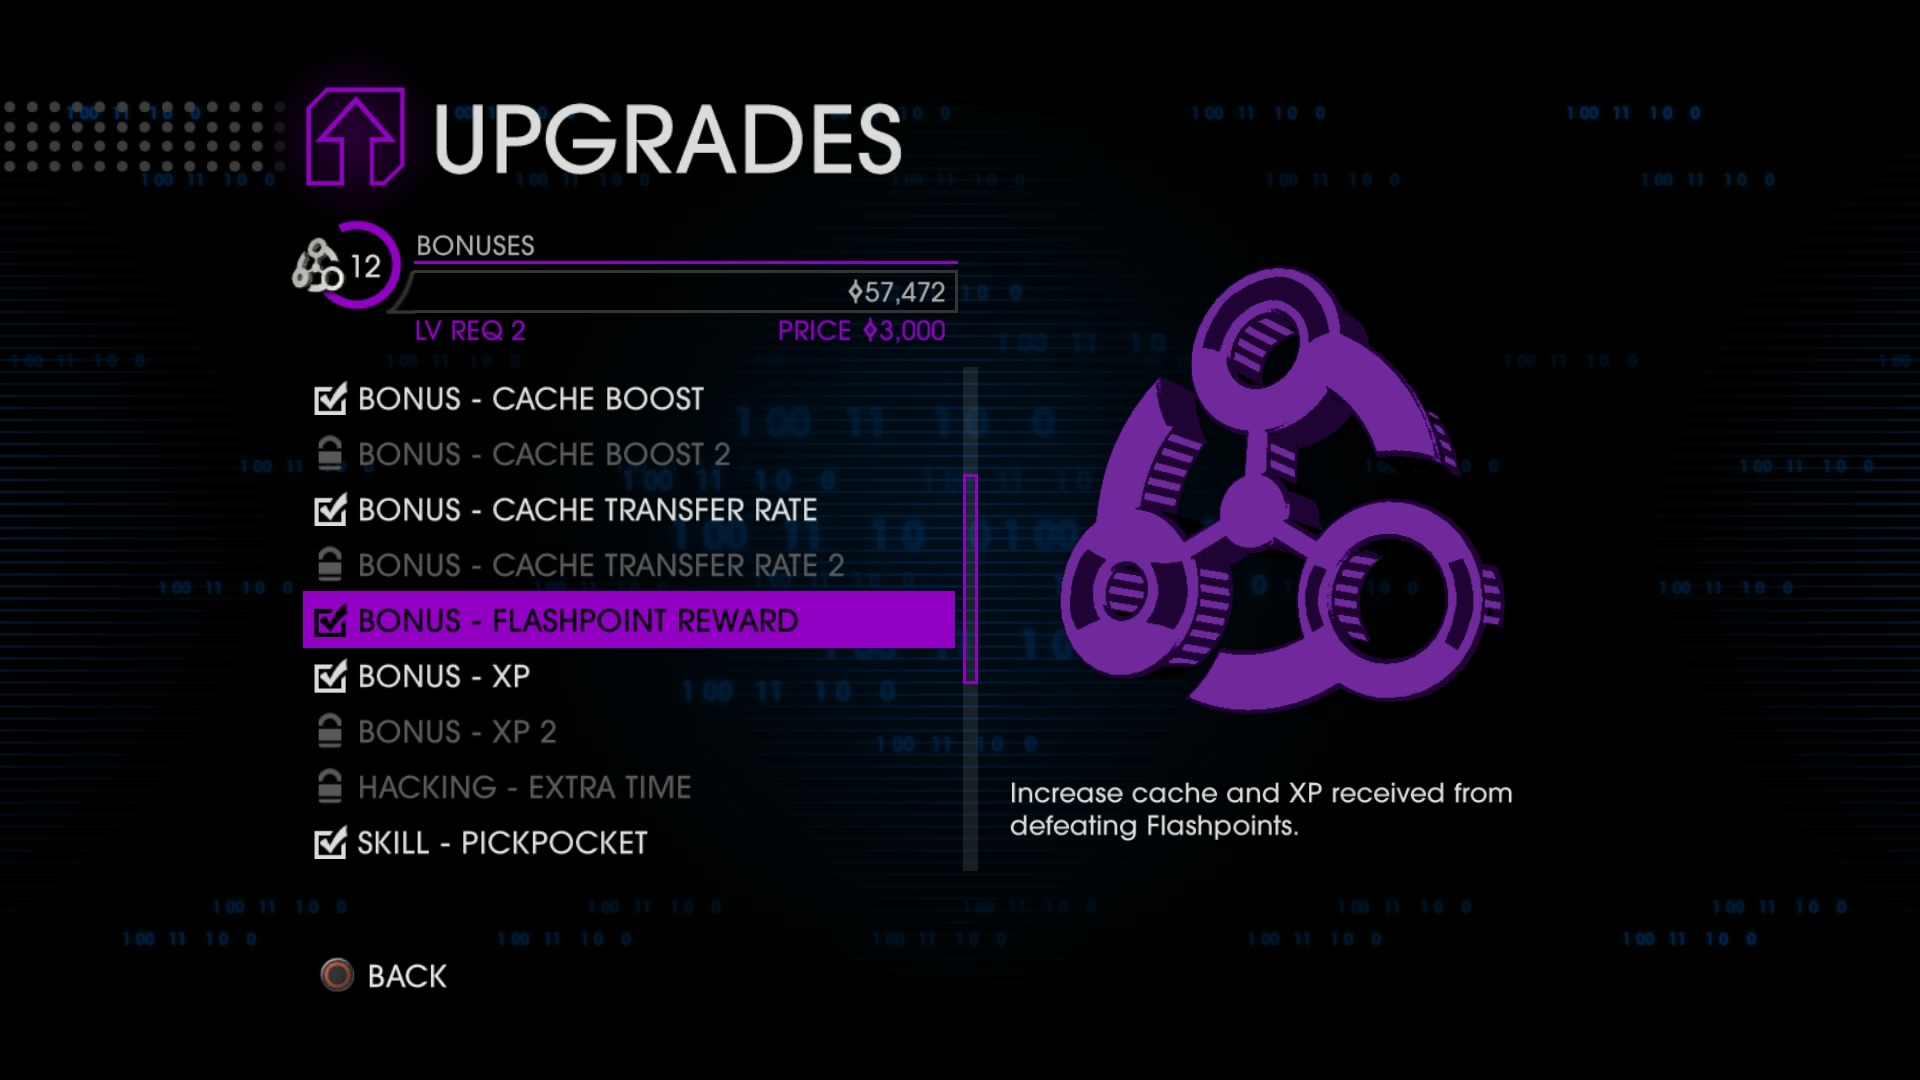 Purchase upgrade bonuses first